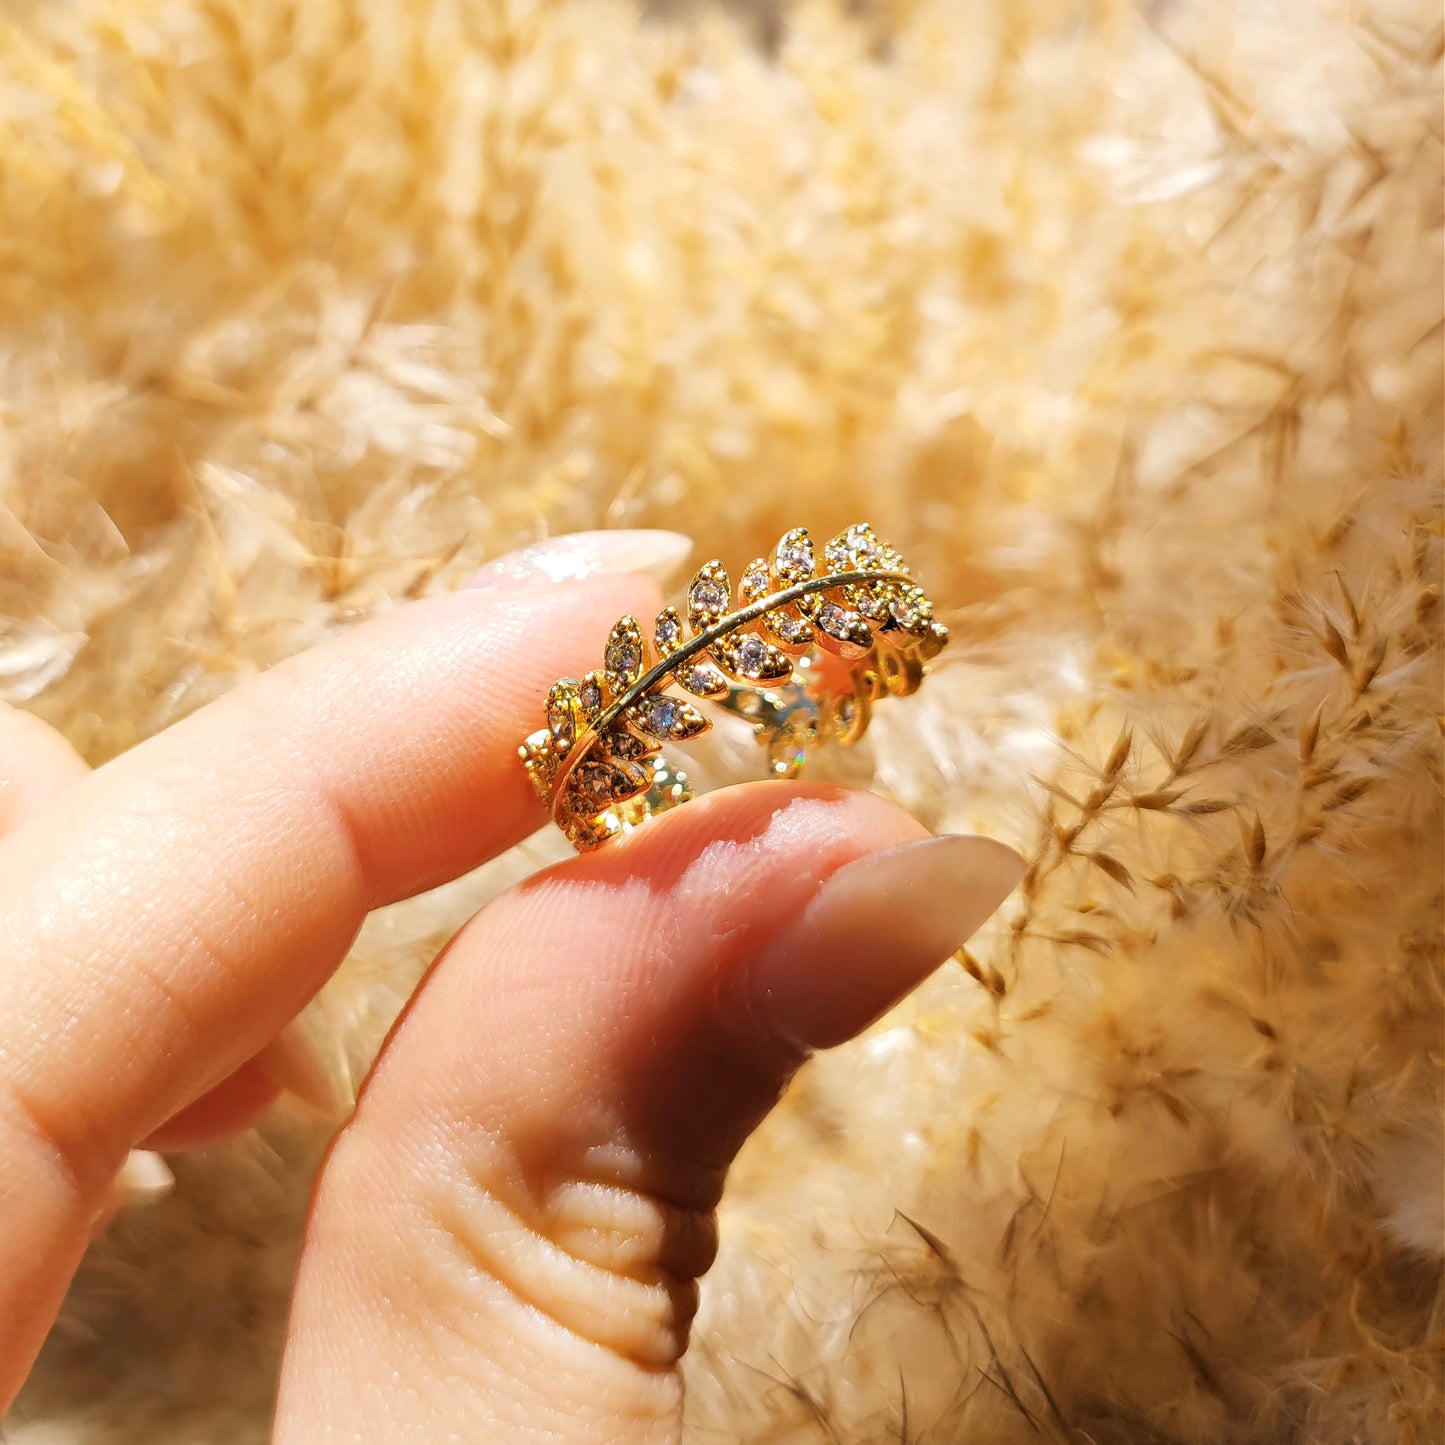 Adjustable Ring "Athena" in gold plated brass and cubic zirconia